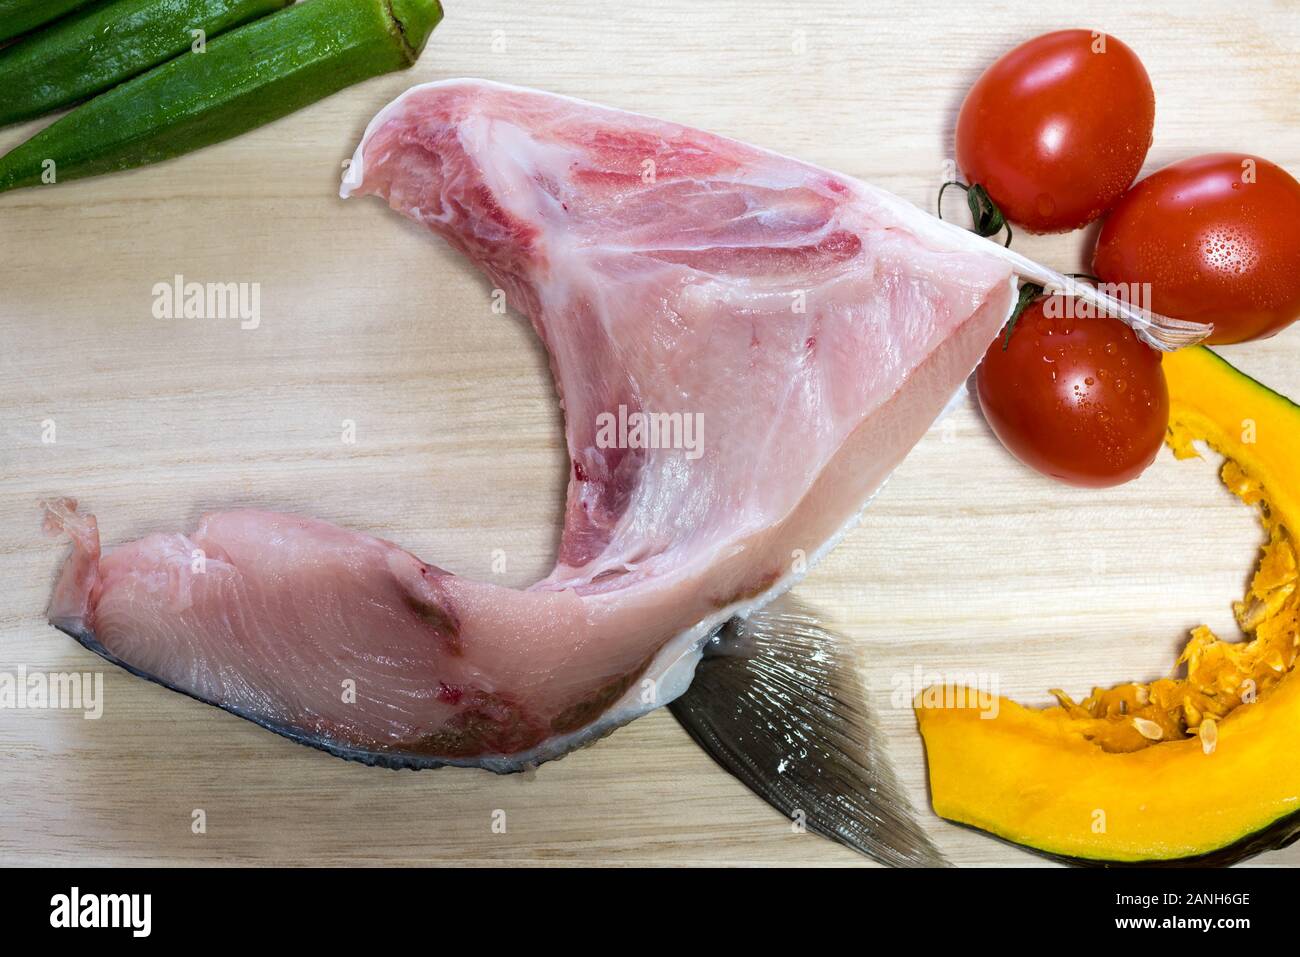 Jaw part of a buri fish or Japanese amberjack also known as yellow tail. This part of the fish is usually grilled and is very common in Japan. Stock Photo